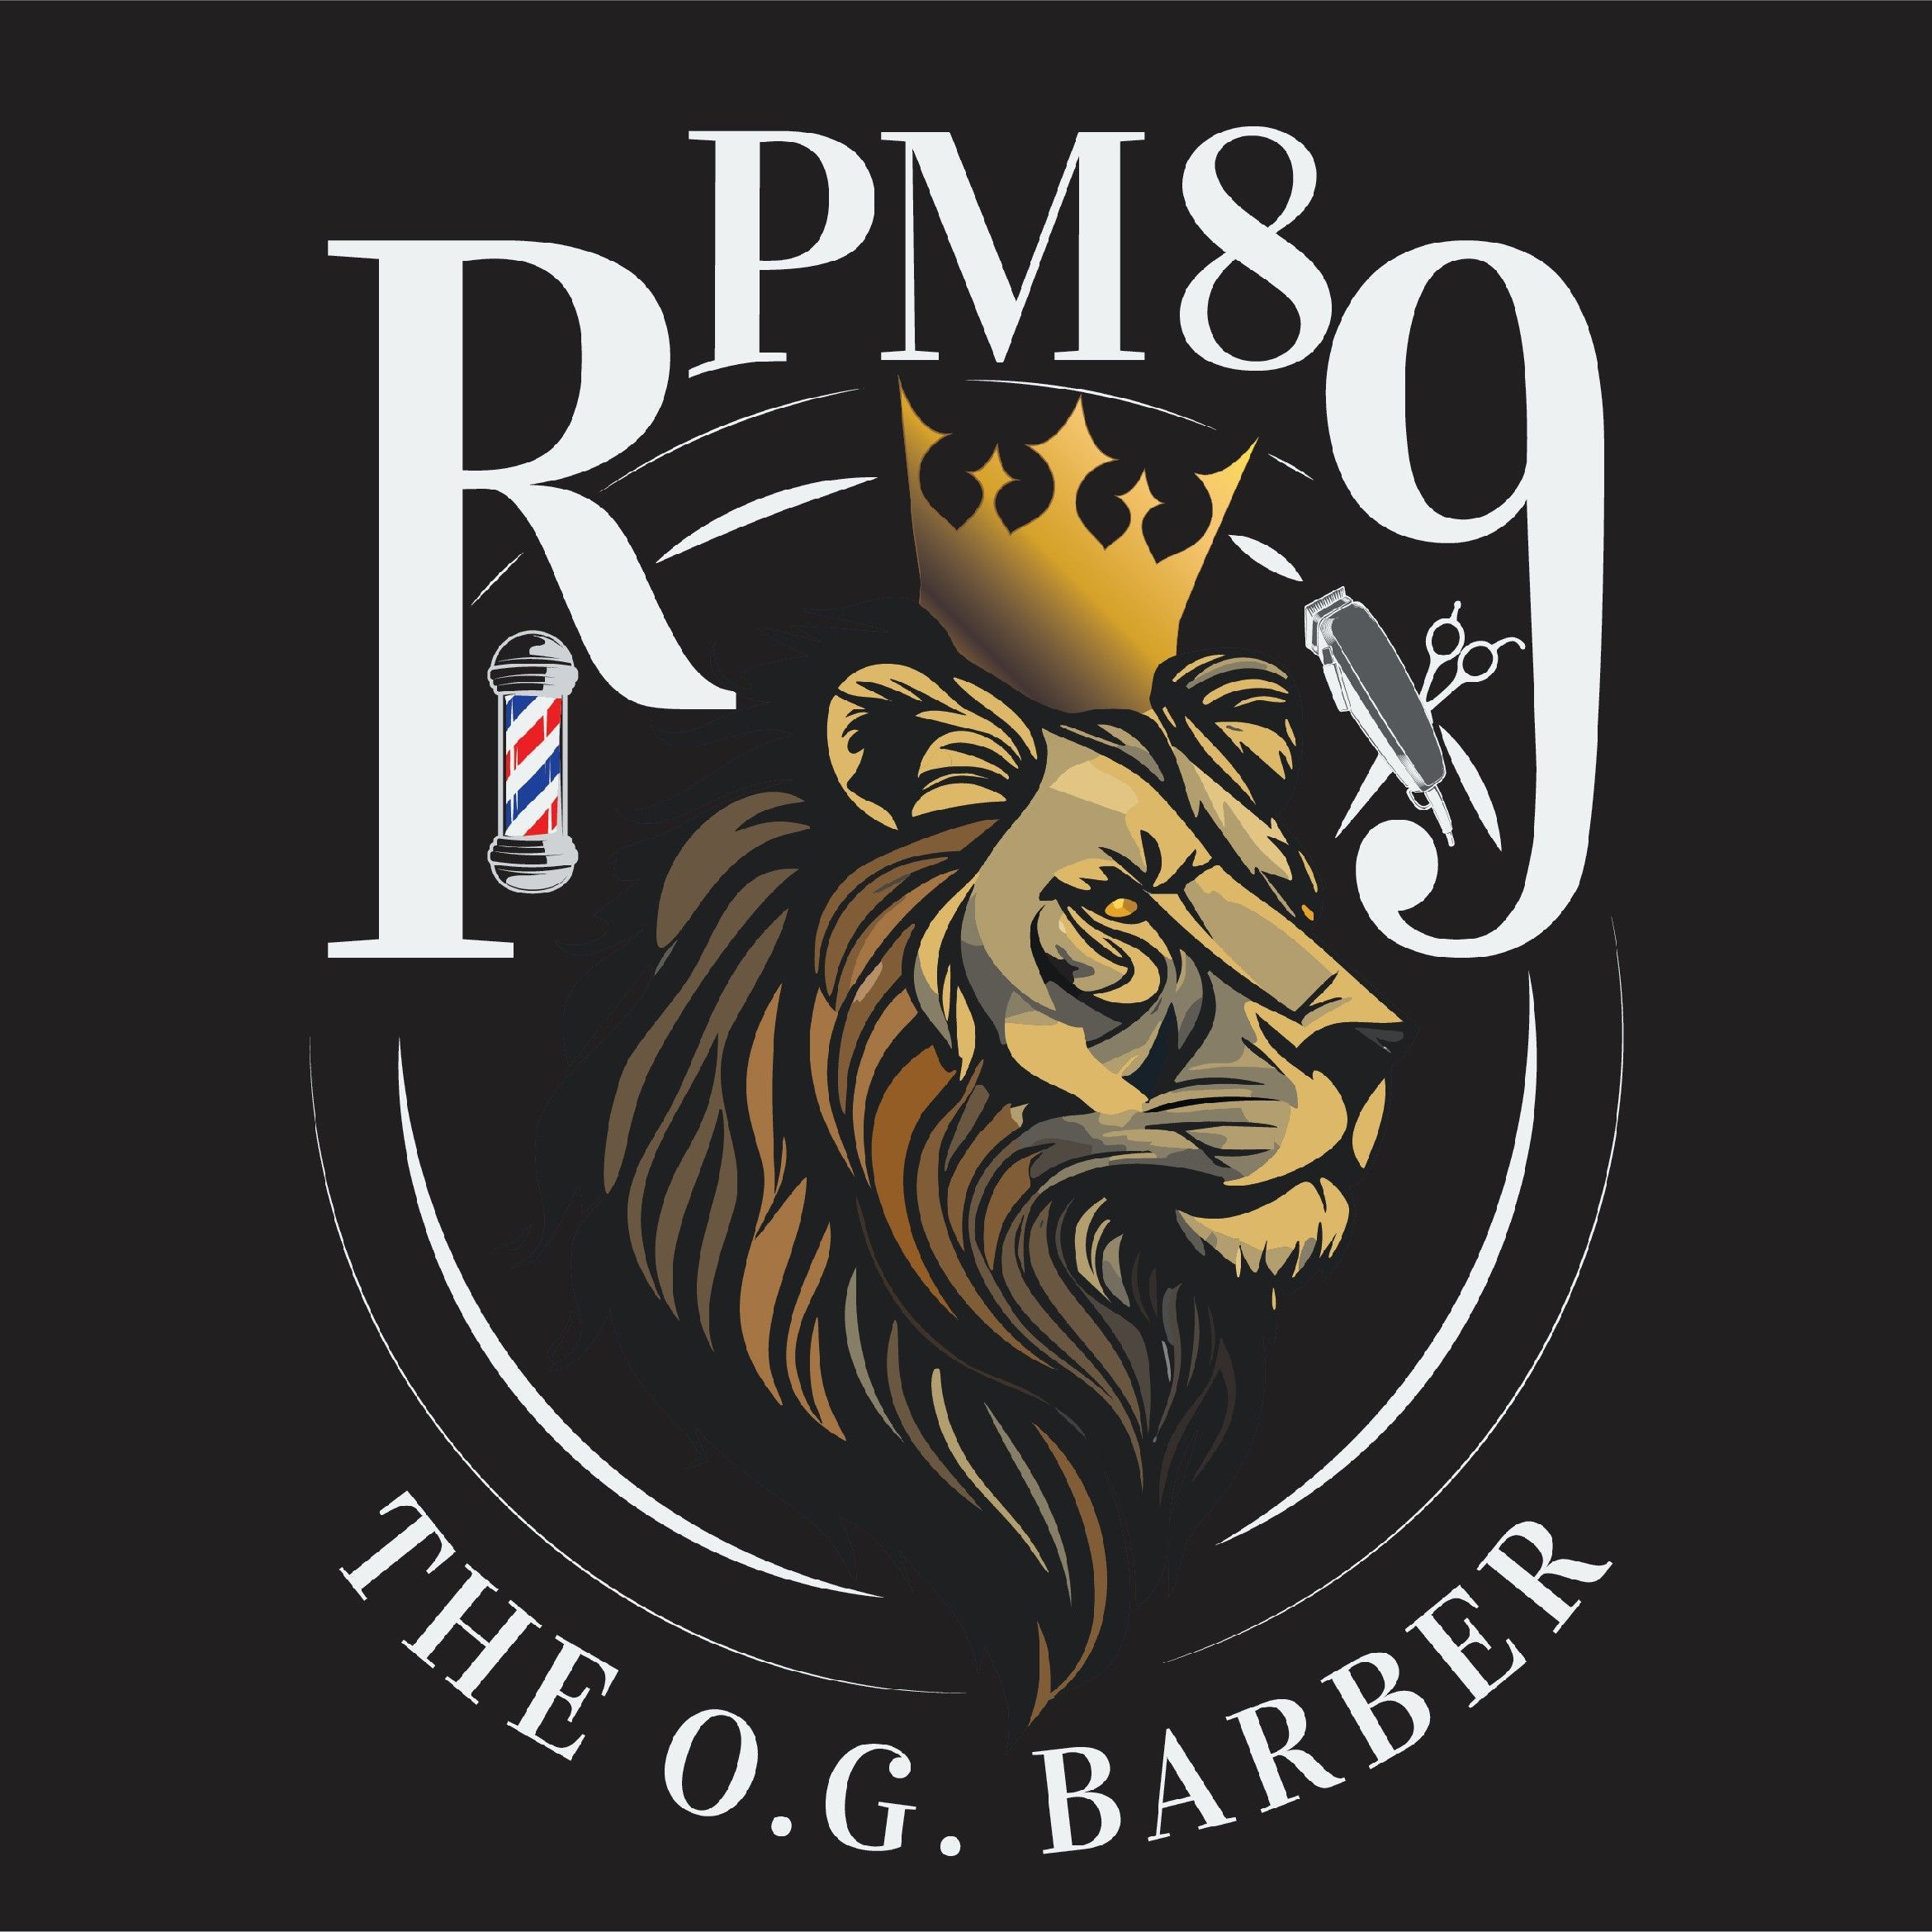 RPM89 The O.G. Barber, 3101 N Himes Ave, Suite B, Tampa, 33607